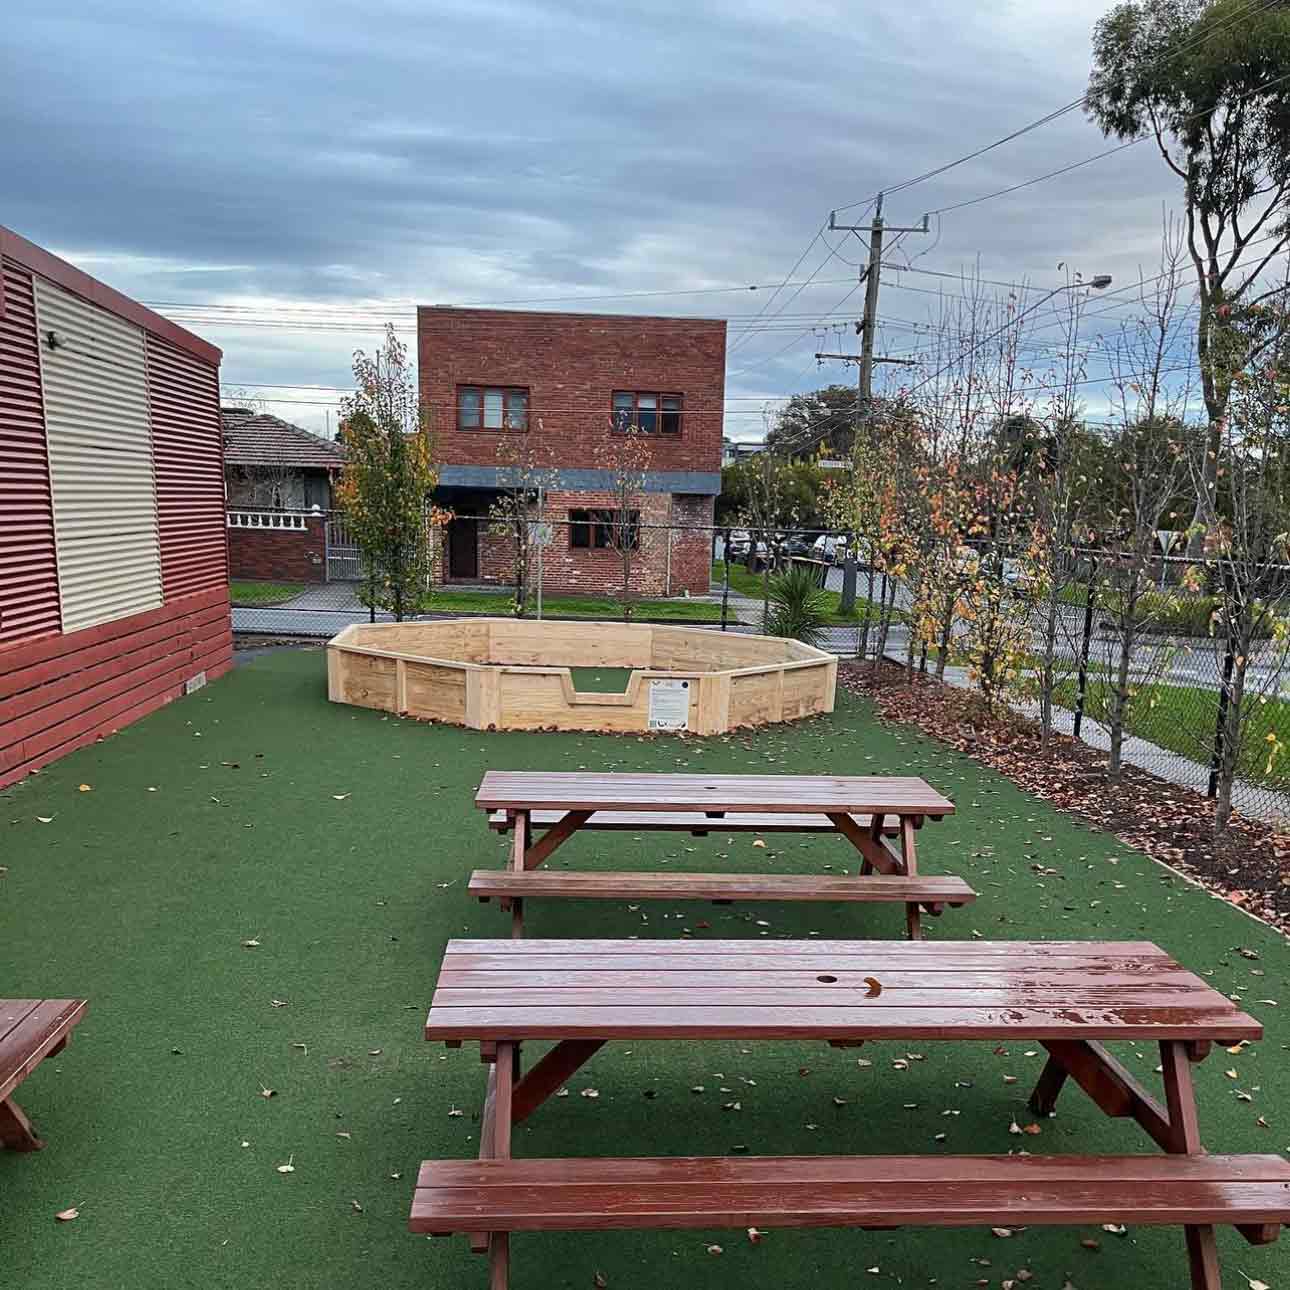 The new Gaga Ball Pit for Mentone Primary School